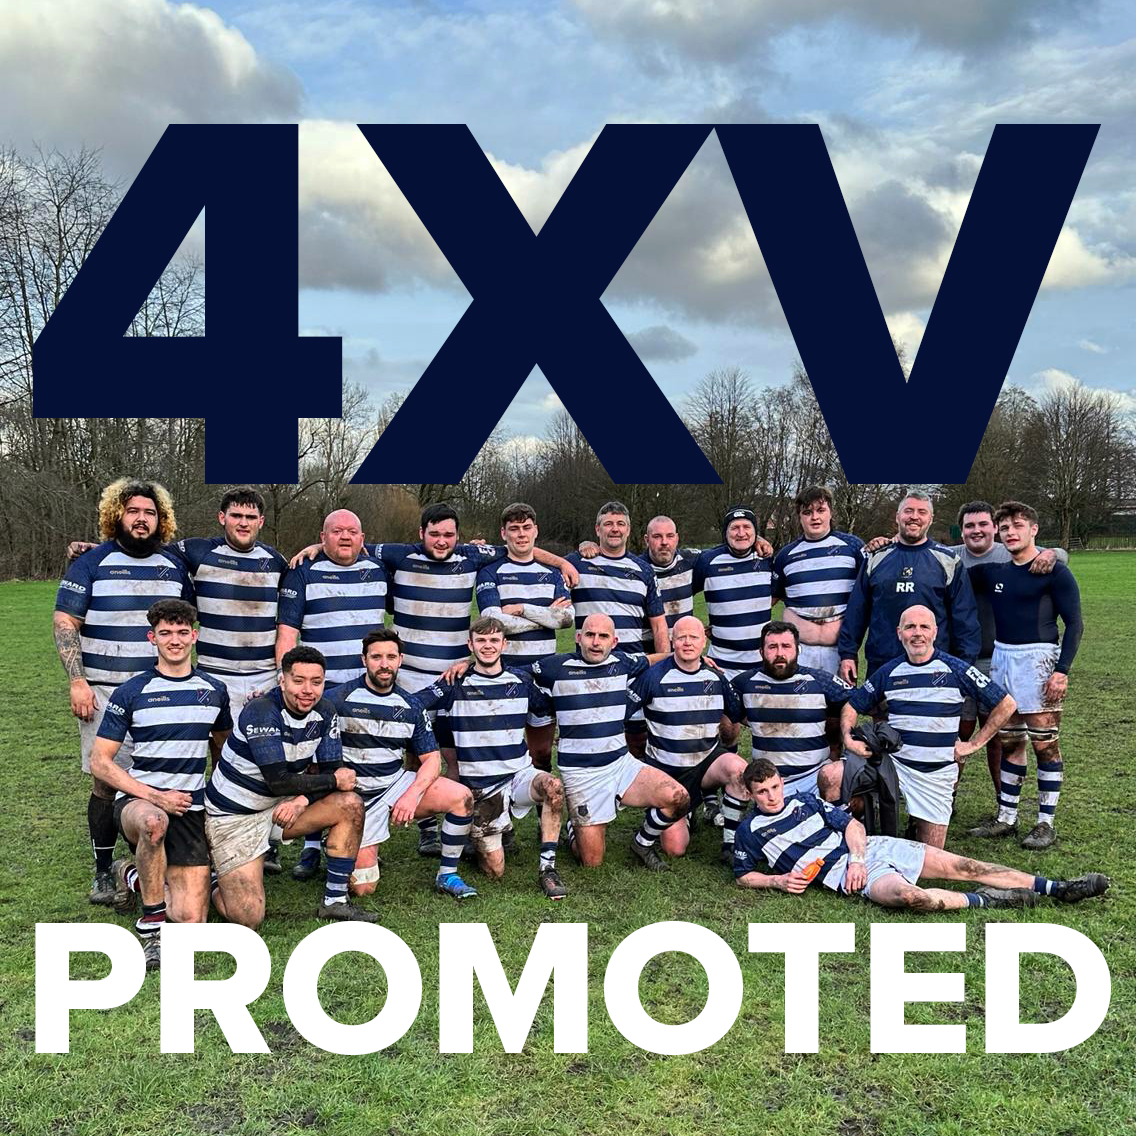 CONGRATULATIONS to the Eccles 4s who earned promotion in their 1st season as a new team, finishing on equal pts at the top of NWRL Div 5 East. A tremendous achievement. Every contribution from every player counted. Credit to Pete, Dave, Paula for keeping the weekly wheels turning